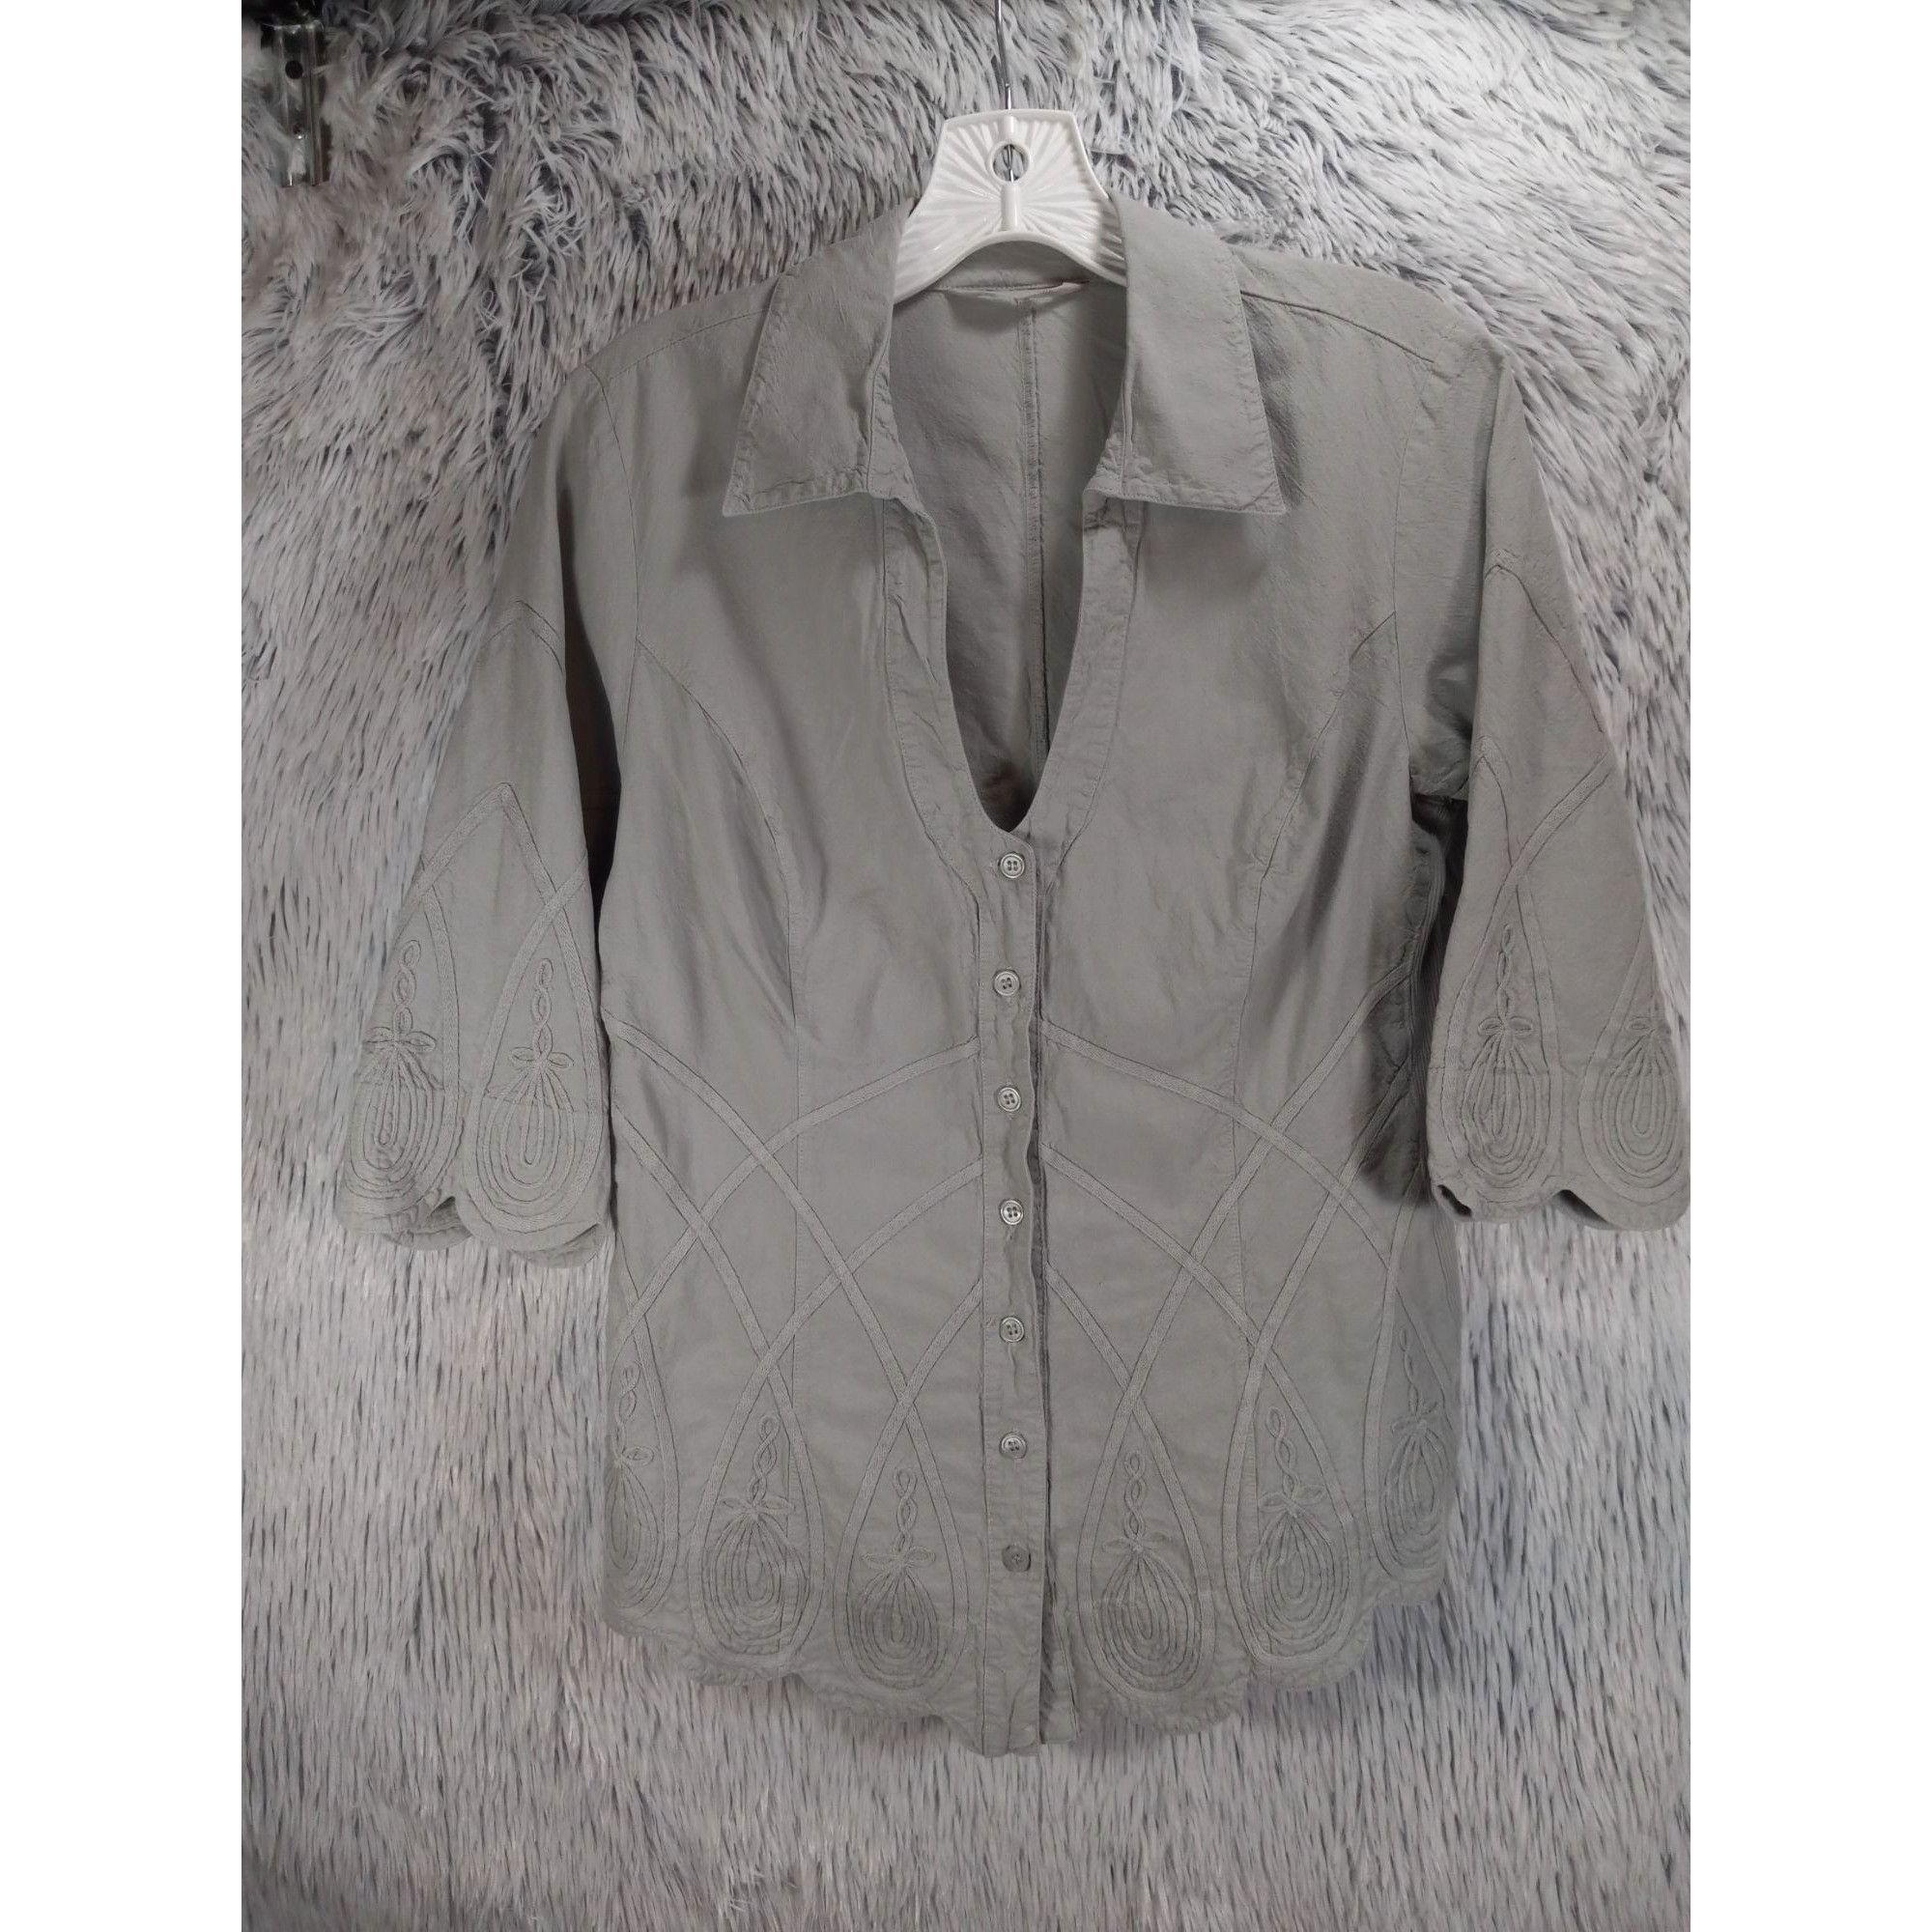 Softs Soft Surroundings Blouse Womans XS Gray Collared Embroidered Size XS / US 0-2 / IT 36-38 - 1 Preview